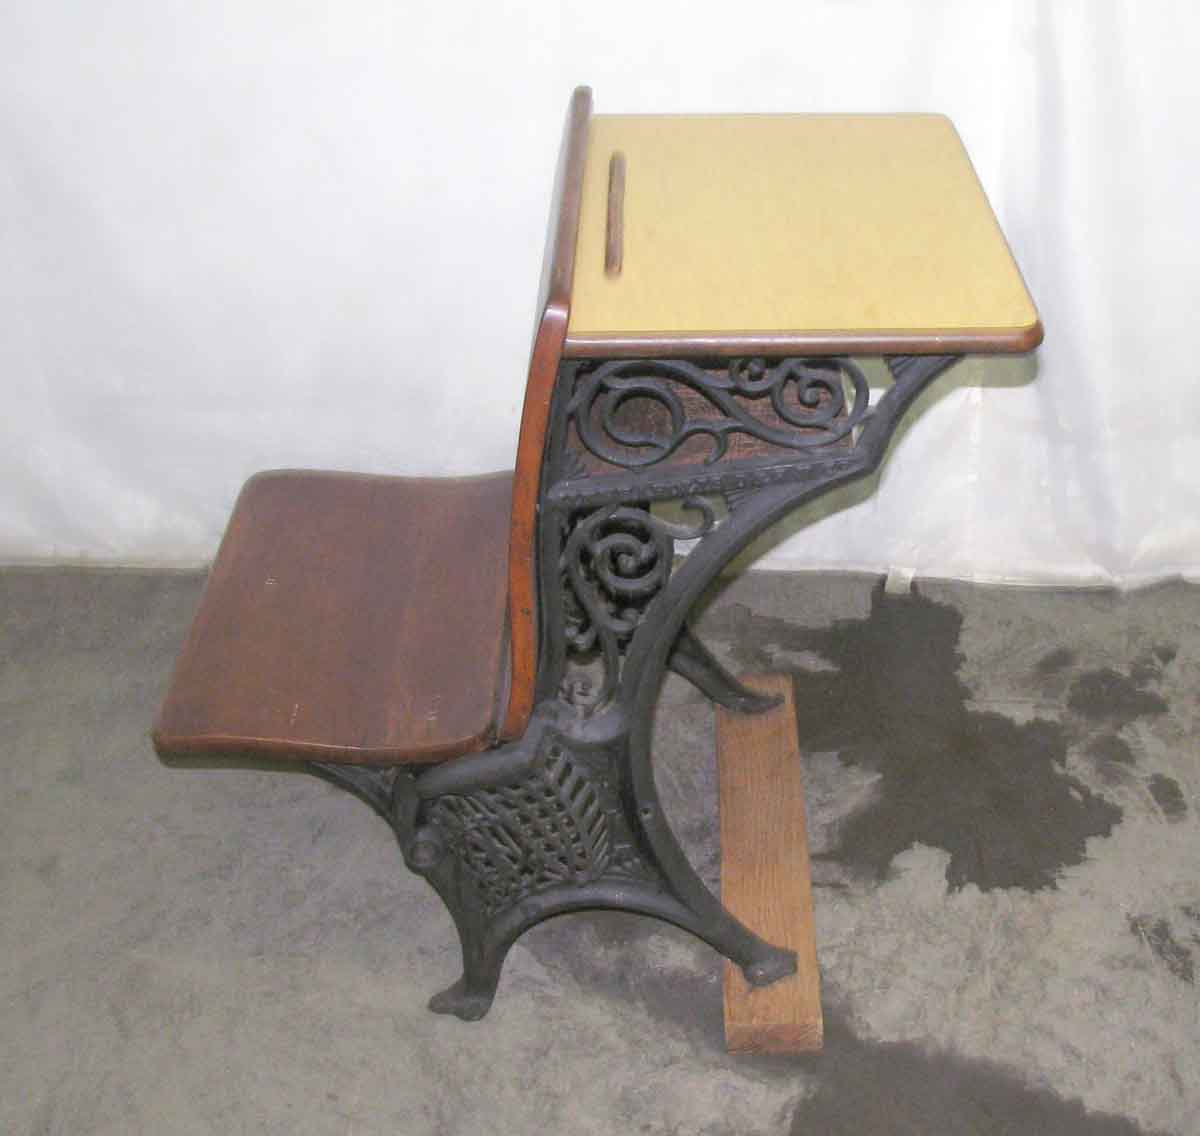 Antique School Desk with Iron Legs | Olde Good Things